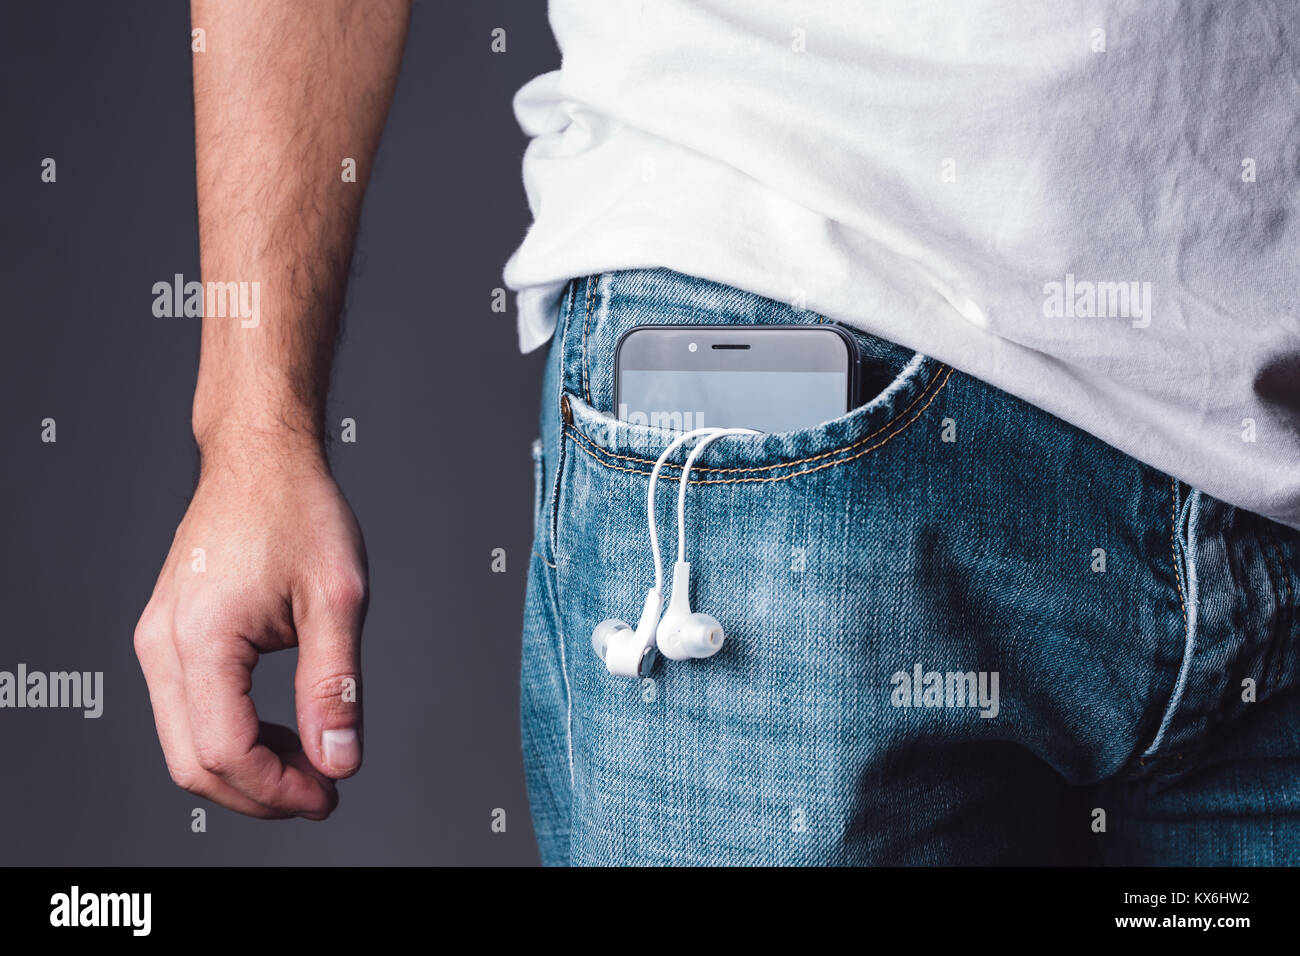 Smartphone with earphones on a caucasian young adult male jeans pocket. Stock Photo